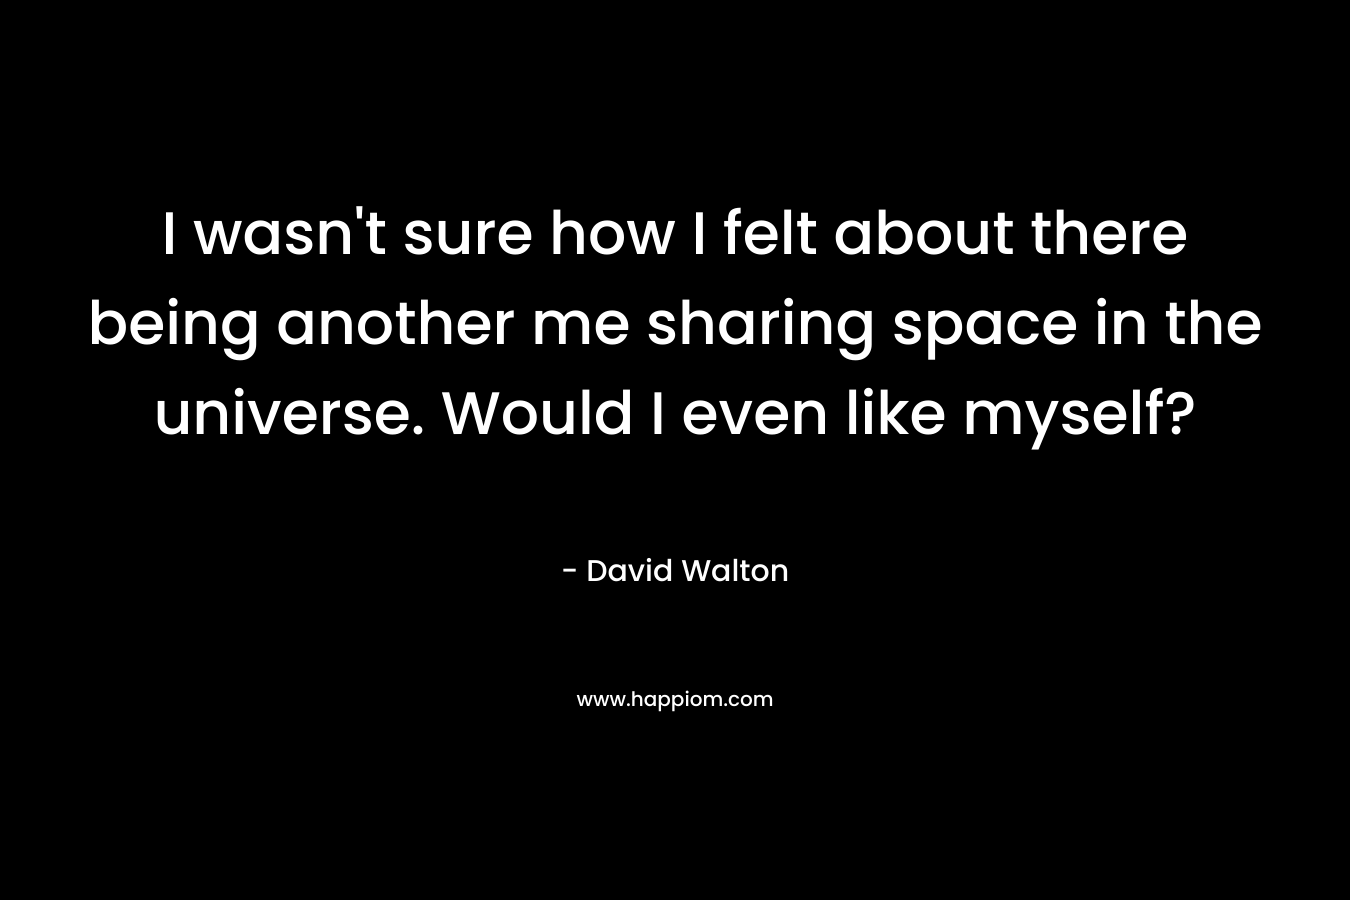 I wasn’t sure how I felt about there being another me sharing space in the universe. Would I even like myself? – David  Walton